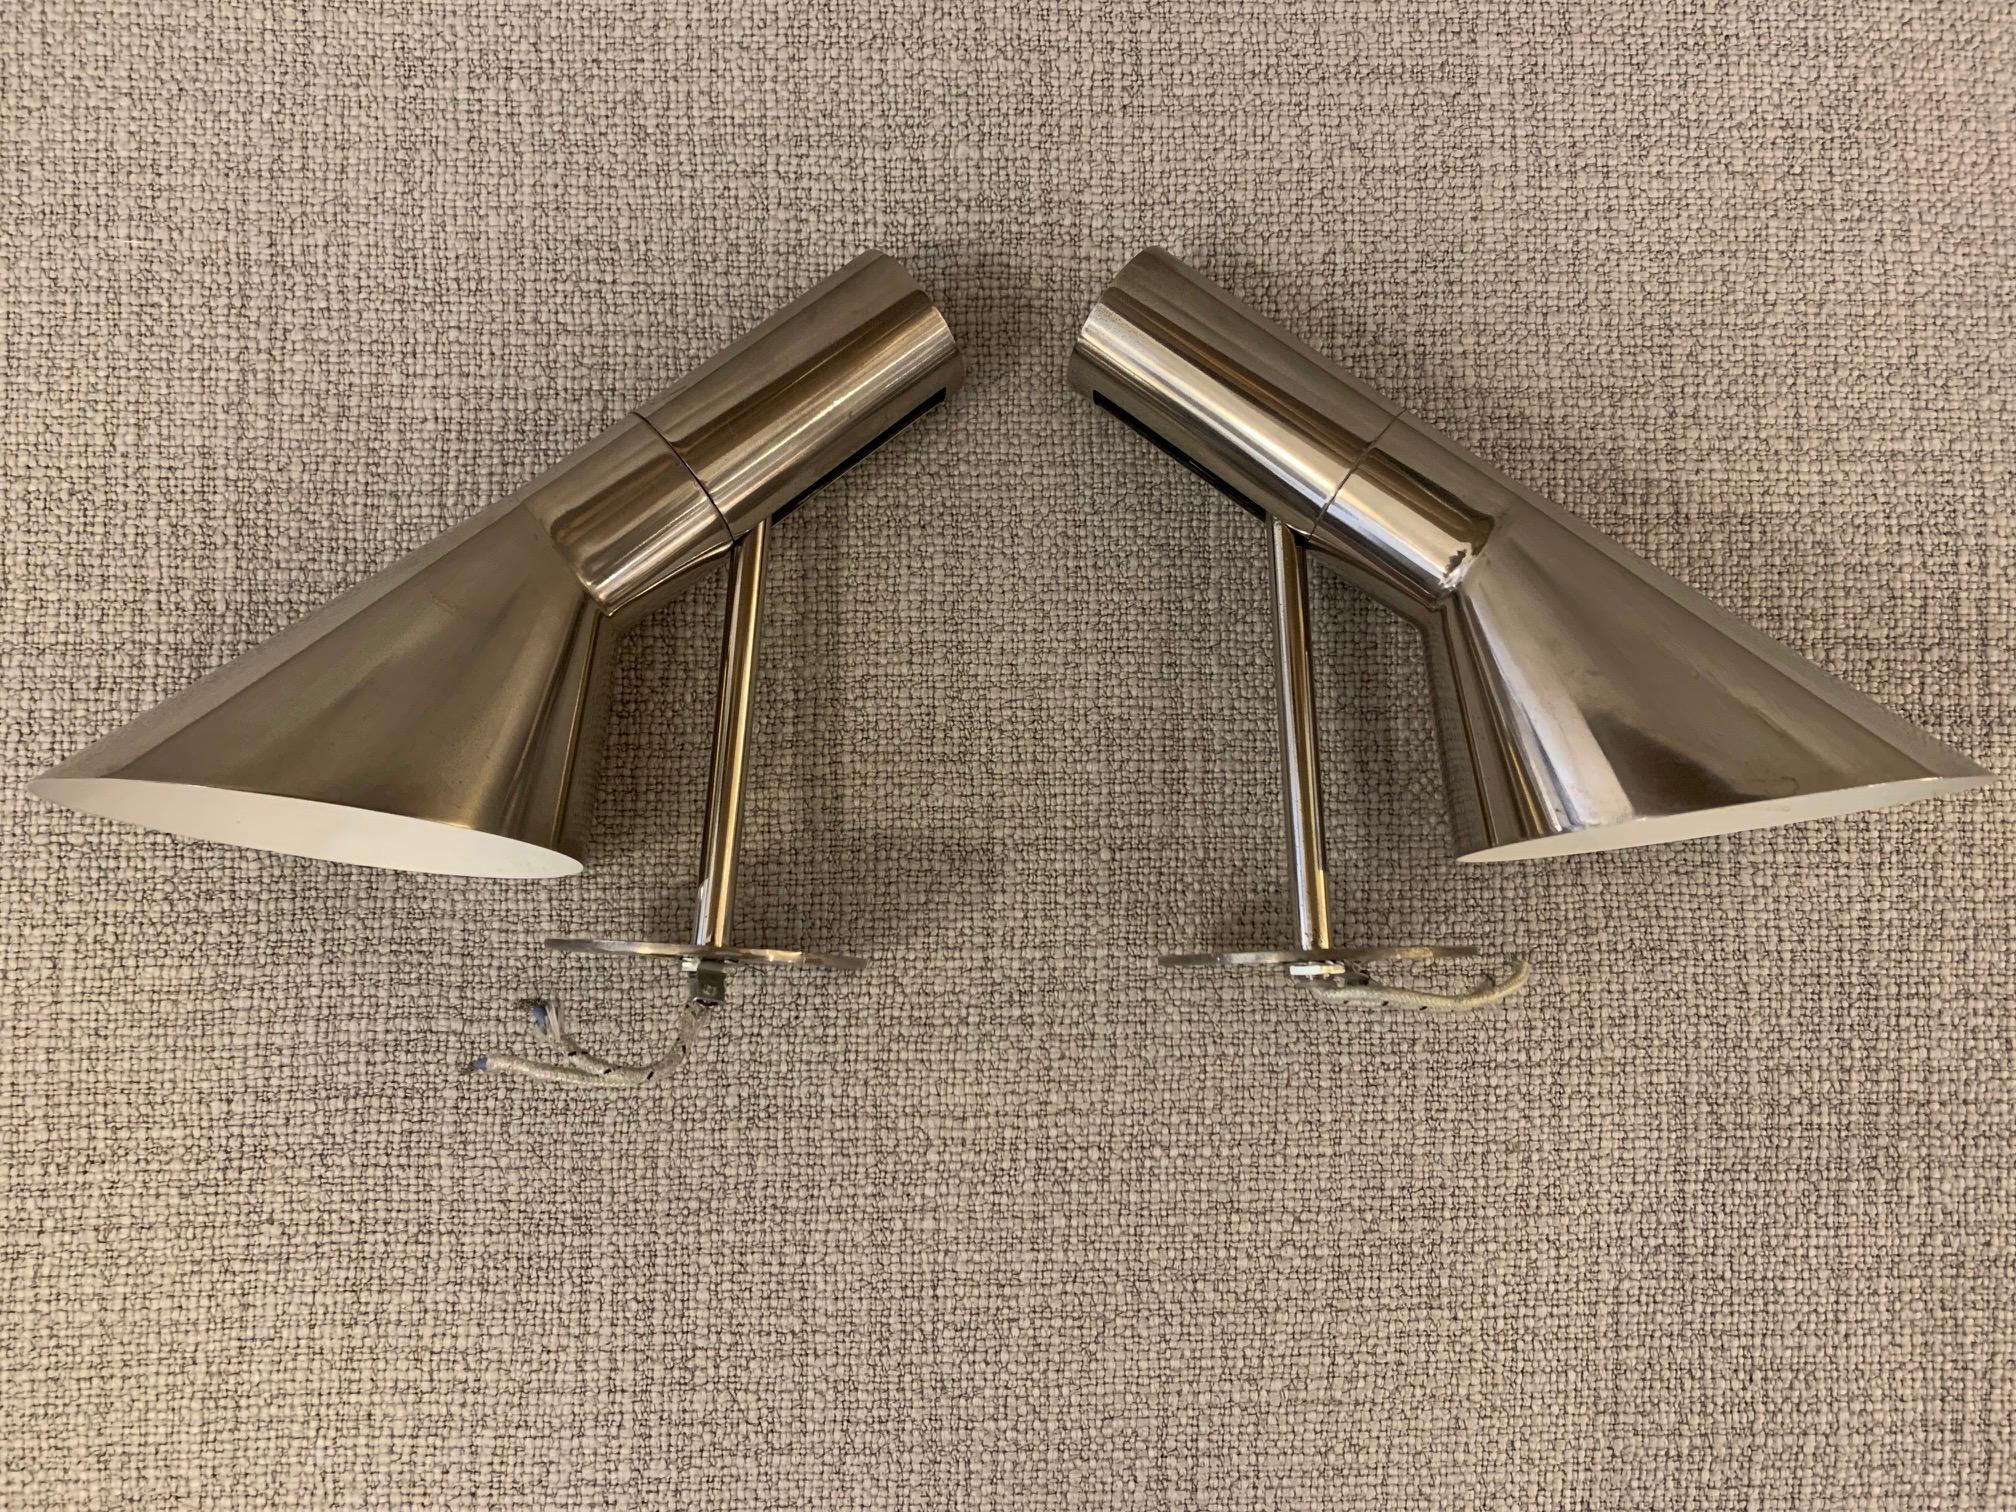 Beautiful pair of Arne Jacobsen AJ Wall / Visor lamps in rare nickel execution. 
Would make a wonderful set of bedside lamps. 
Lamps are executed with quality porcelain fittings and are individually marked with Louis Poulsen labels. 
Excellent all